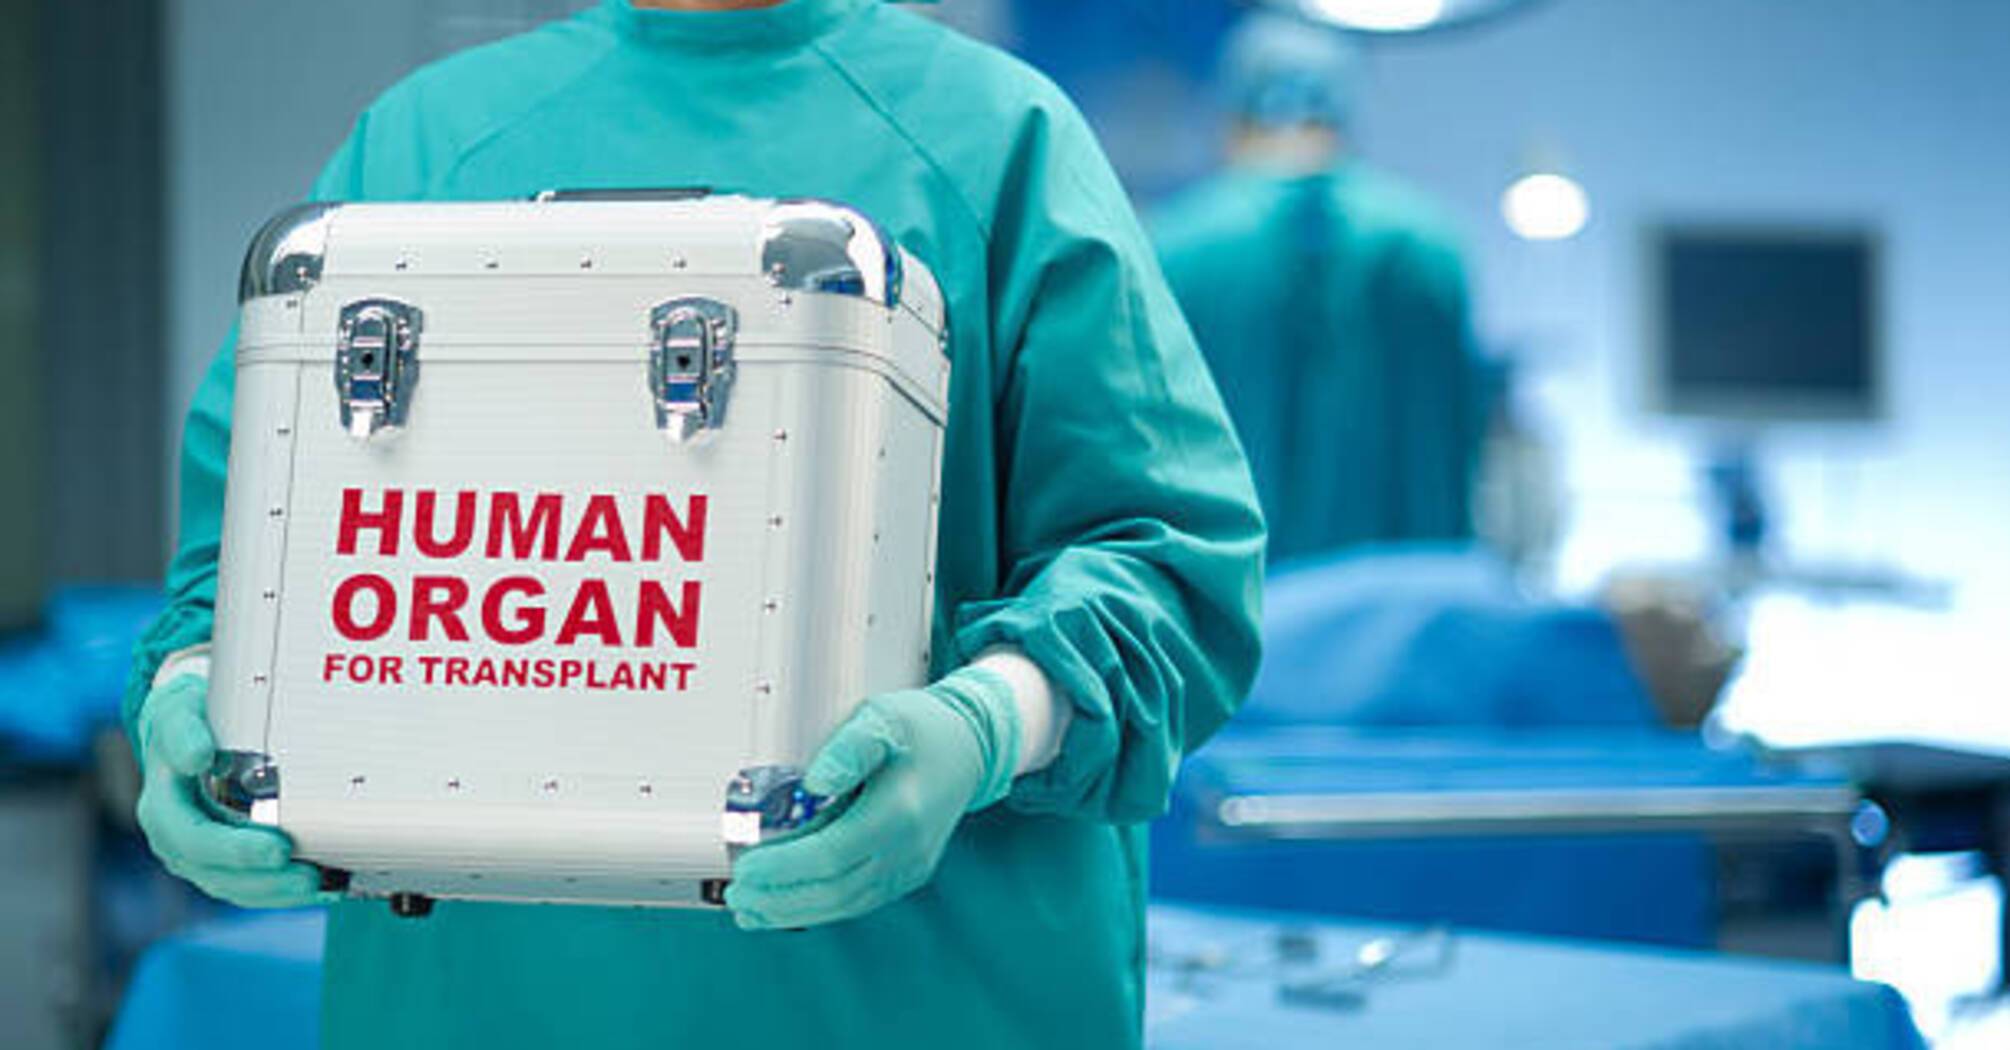 Placebo effect or something unknown? Professor explains why organ transplantation can change a person's personality